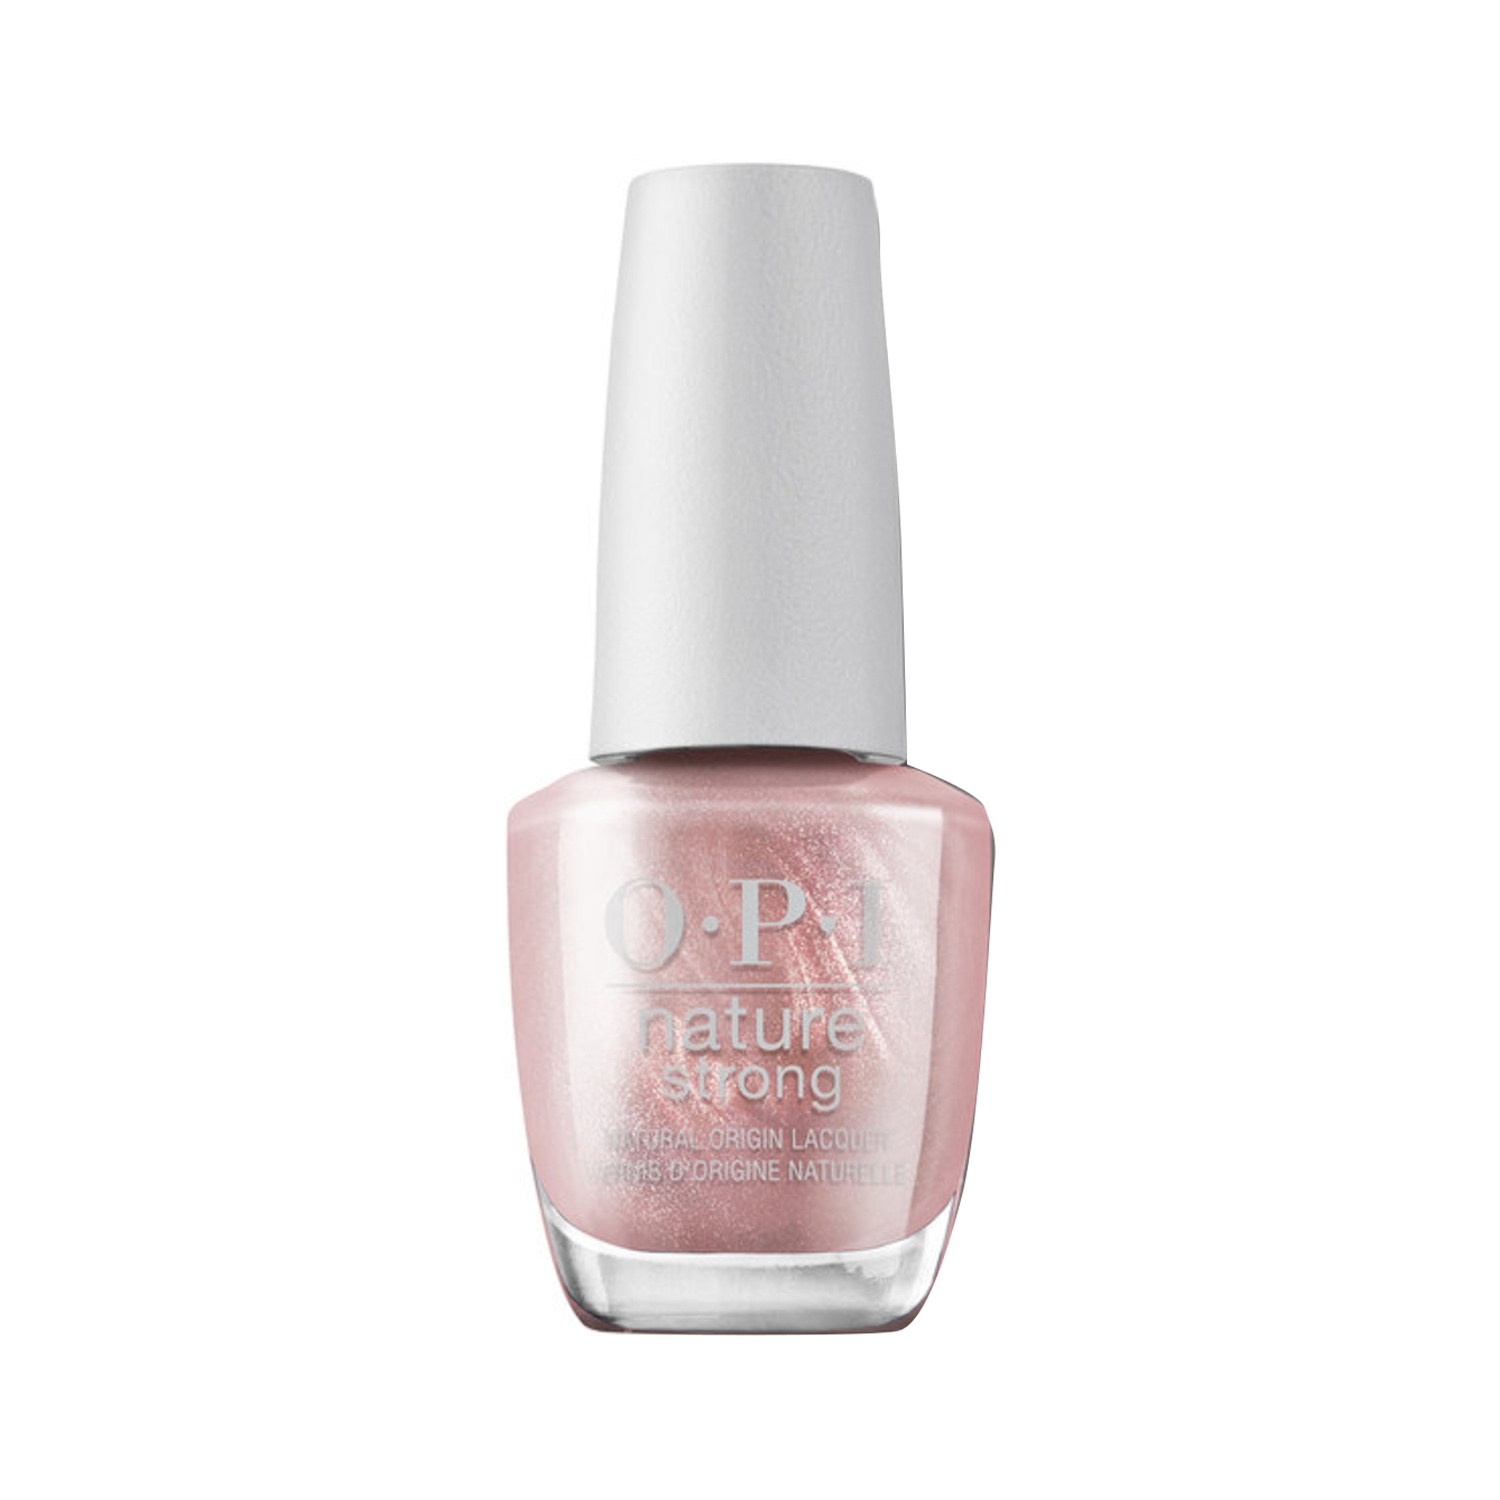 O.P.I | O.P.I Nature Strong Nail Paint - Intentions Are Rose Gold (15ml)